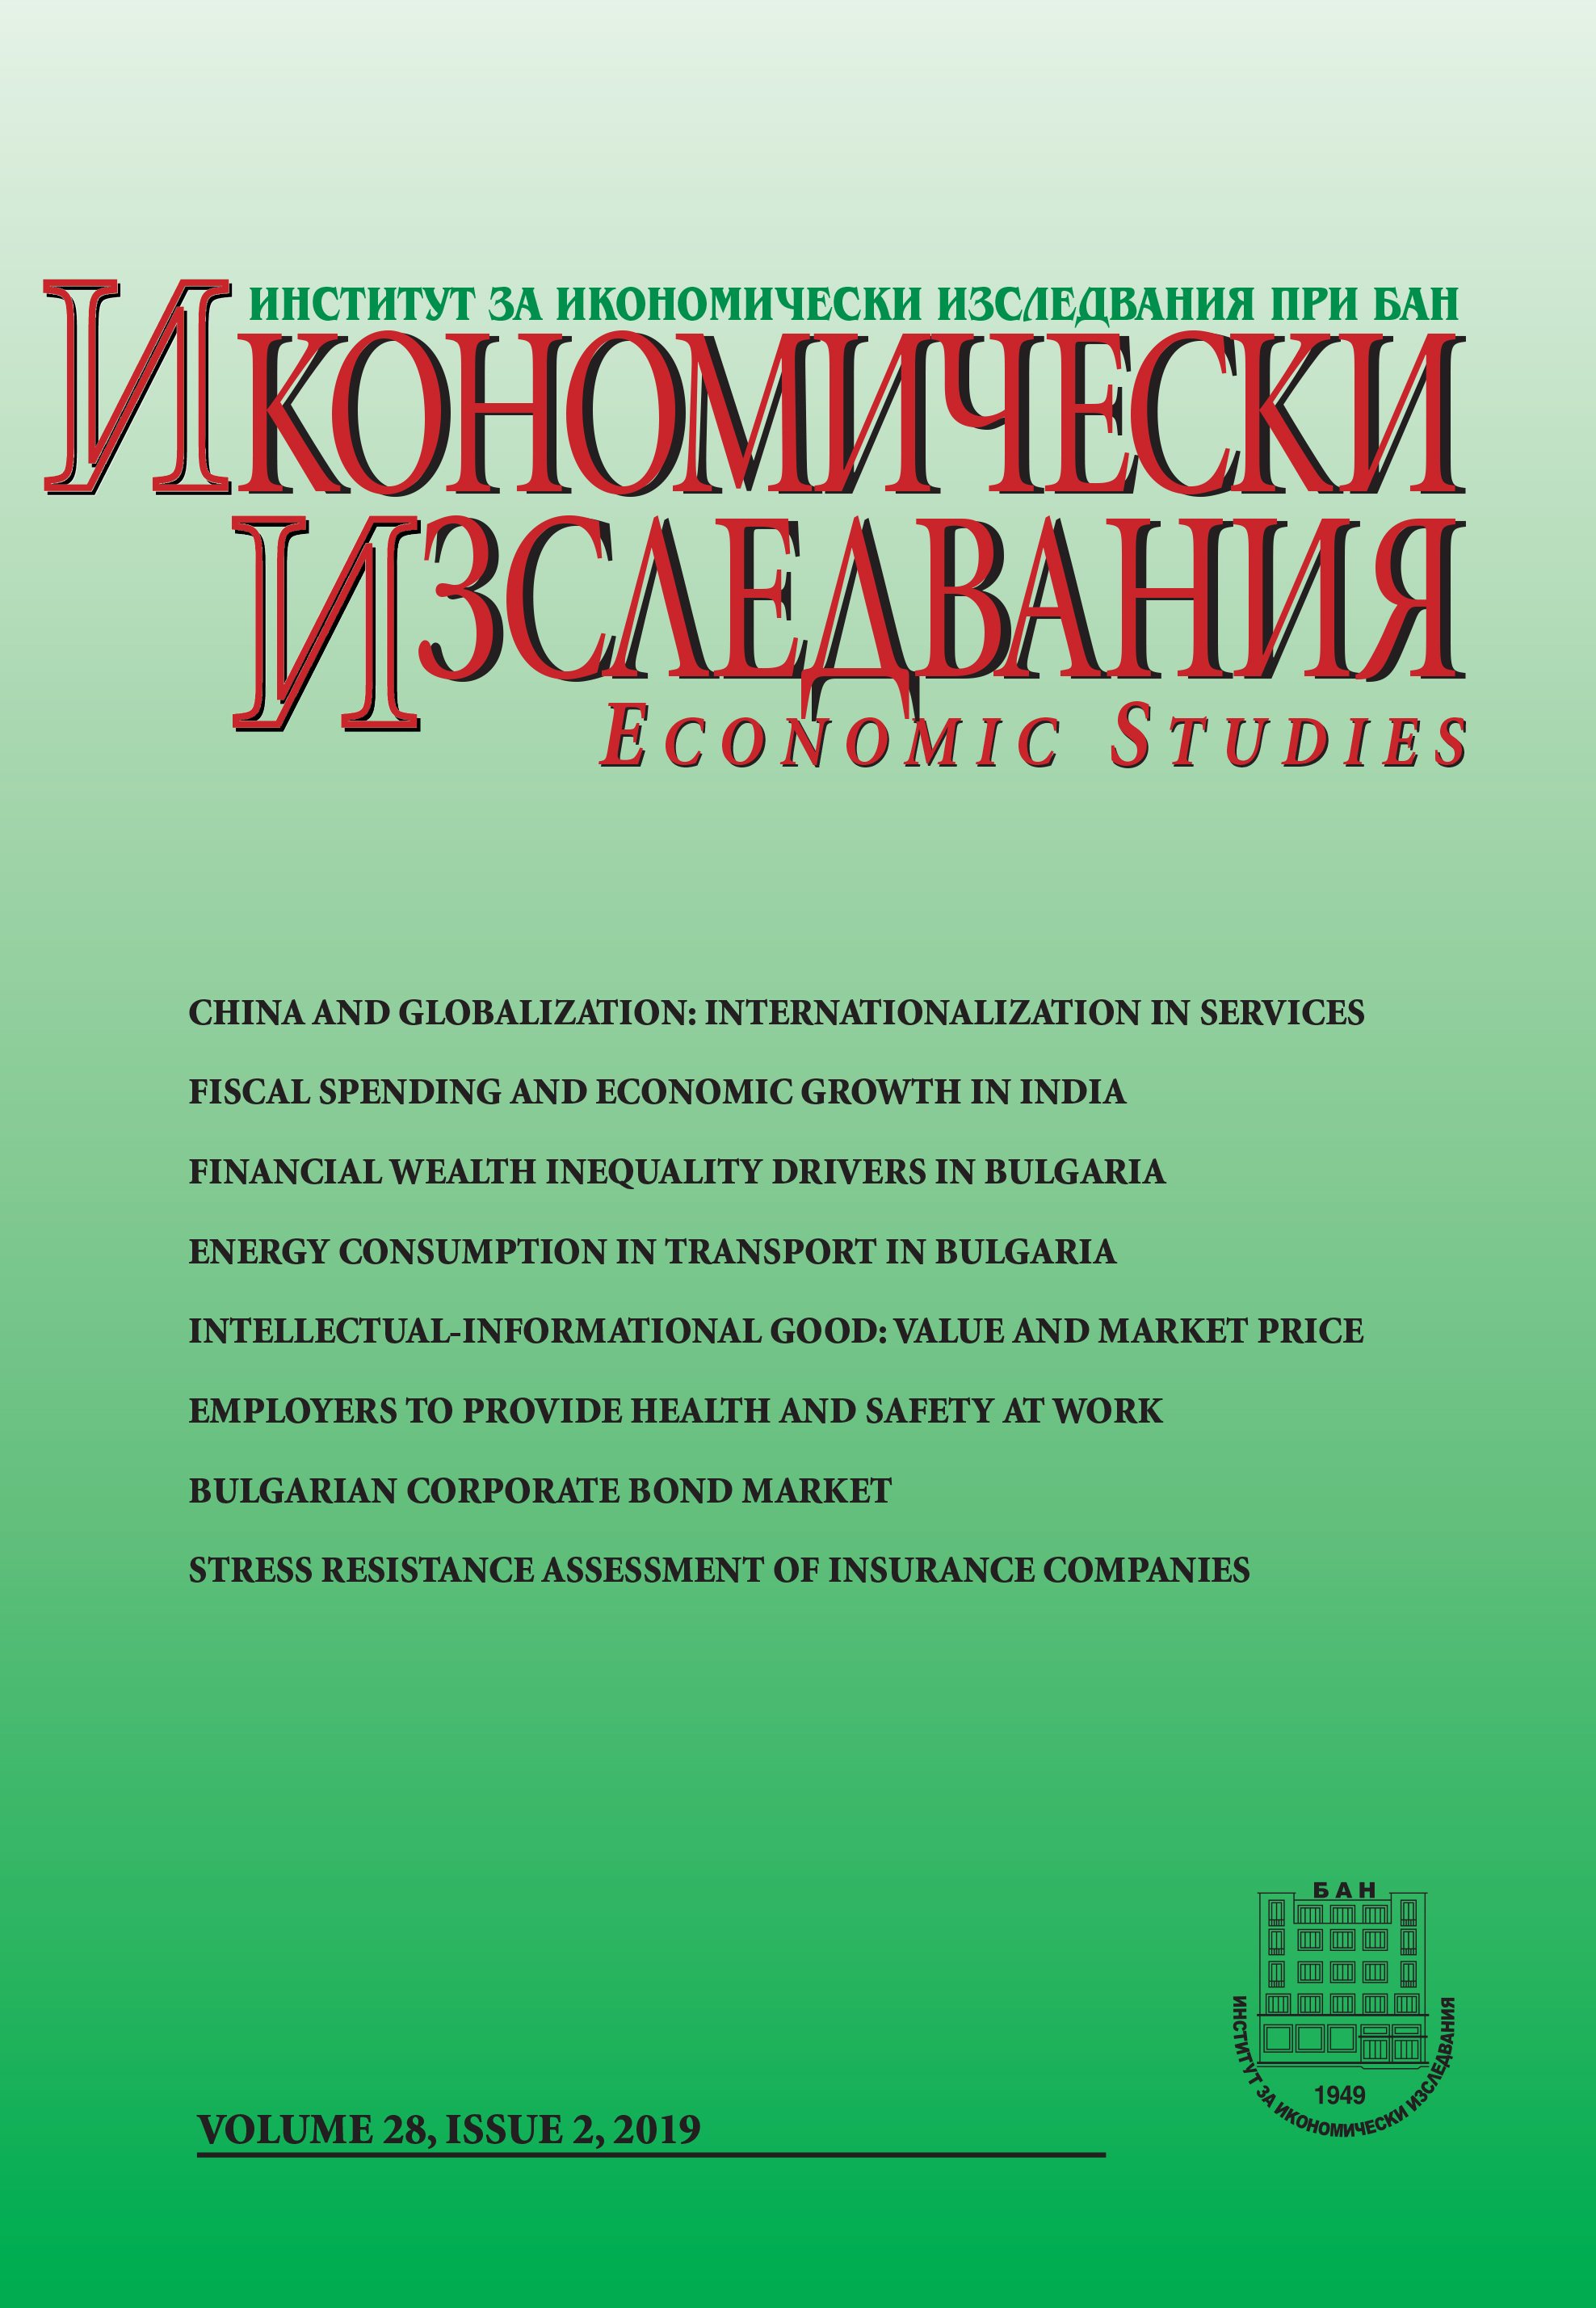 The Scale Measurement of the Indicators of the Stress Resistance Assessment of Insurance Companies in Ukraine Cover Image